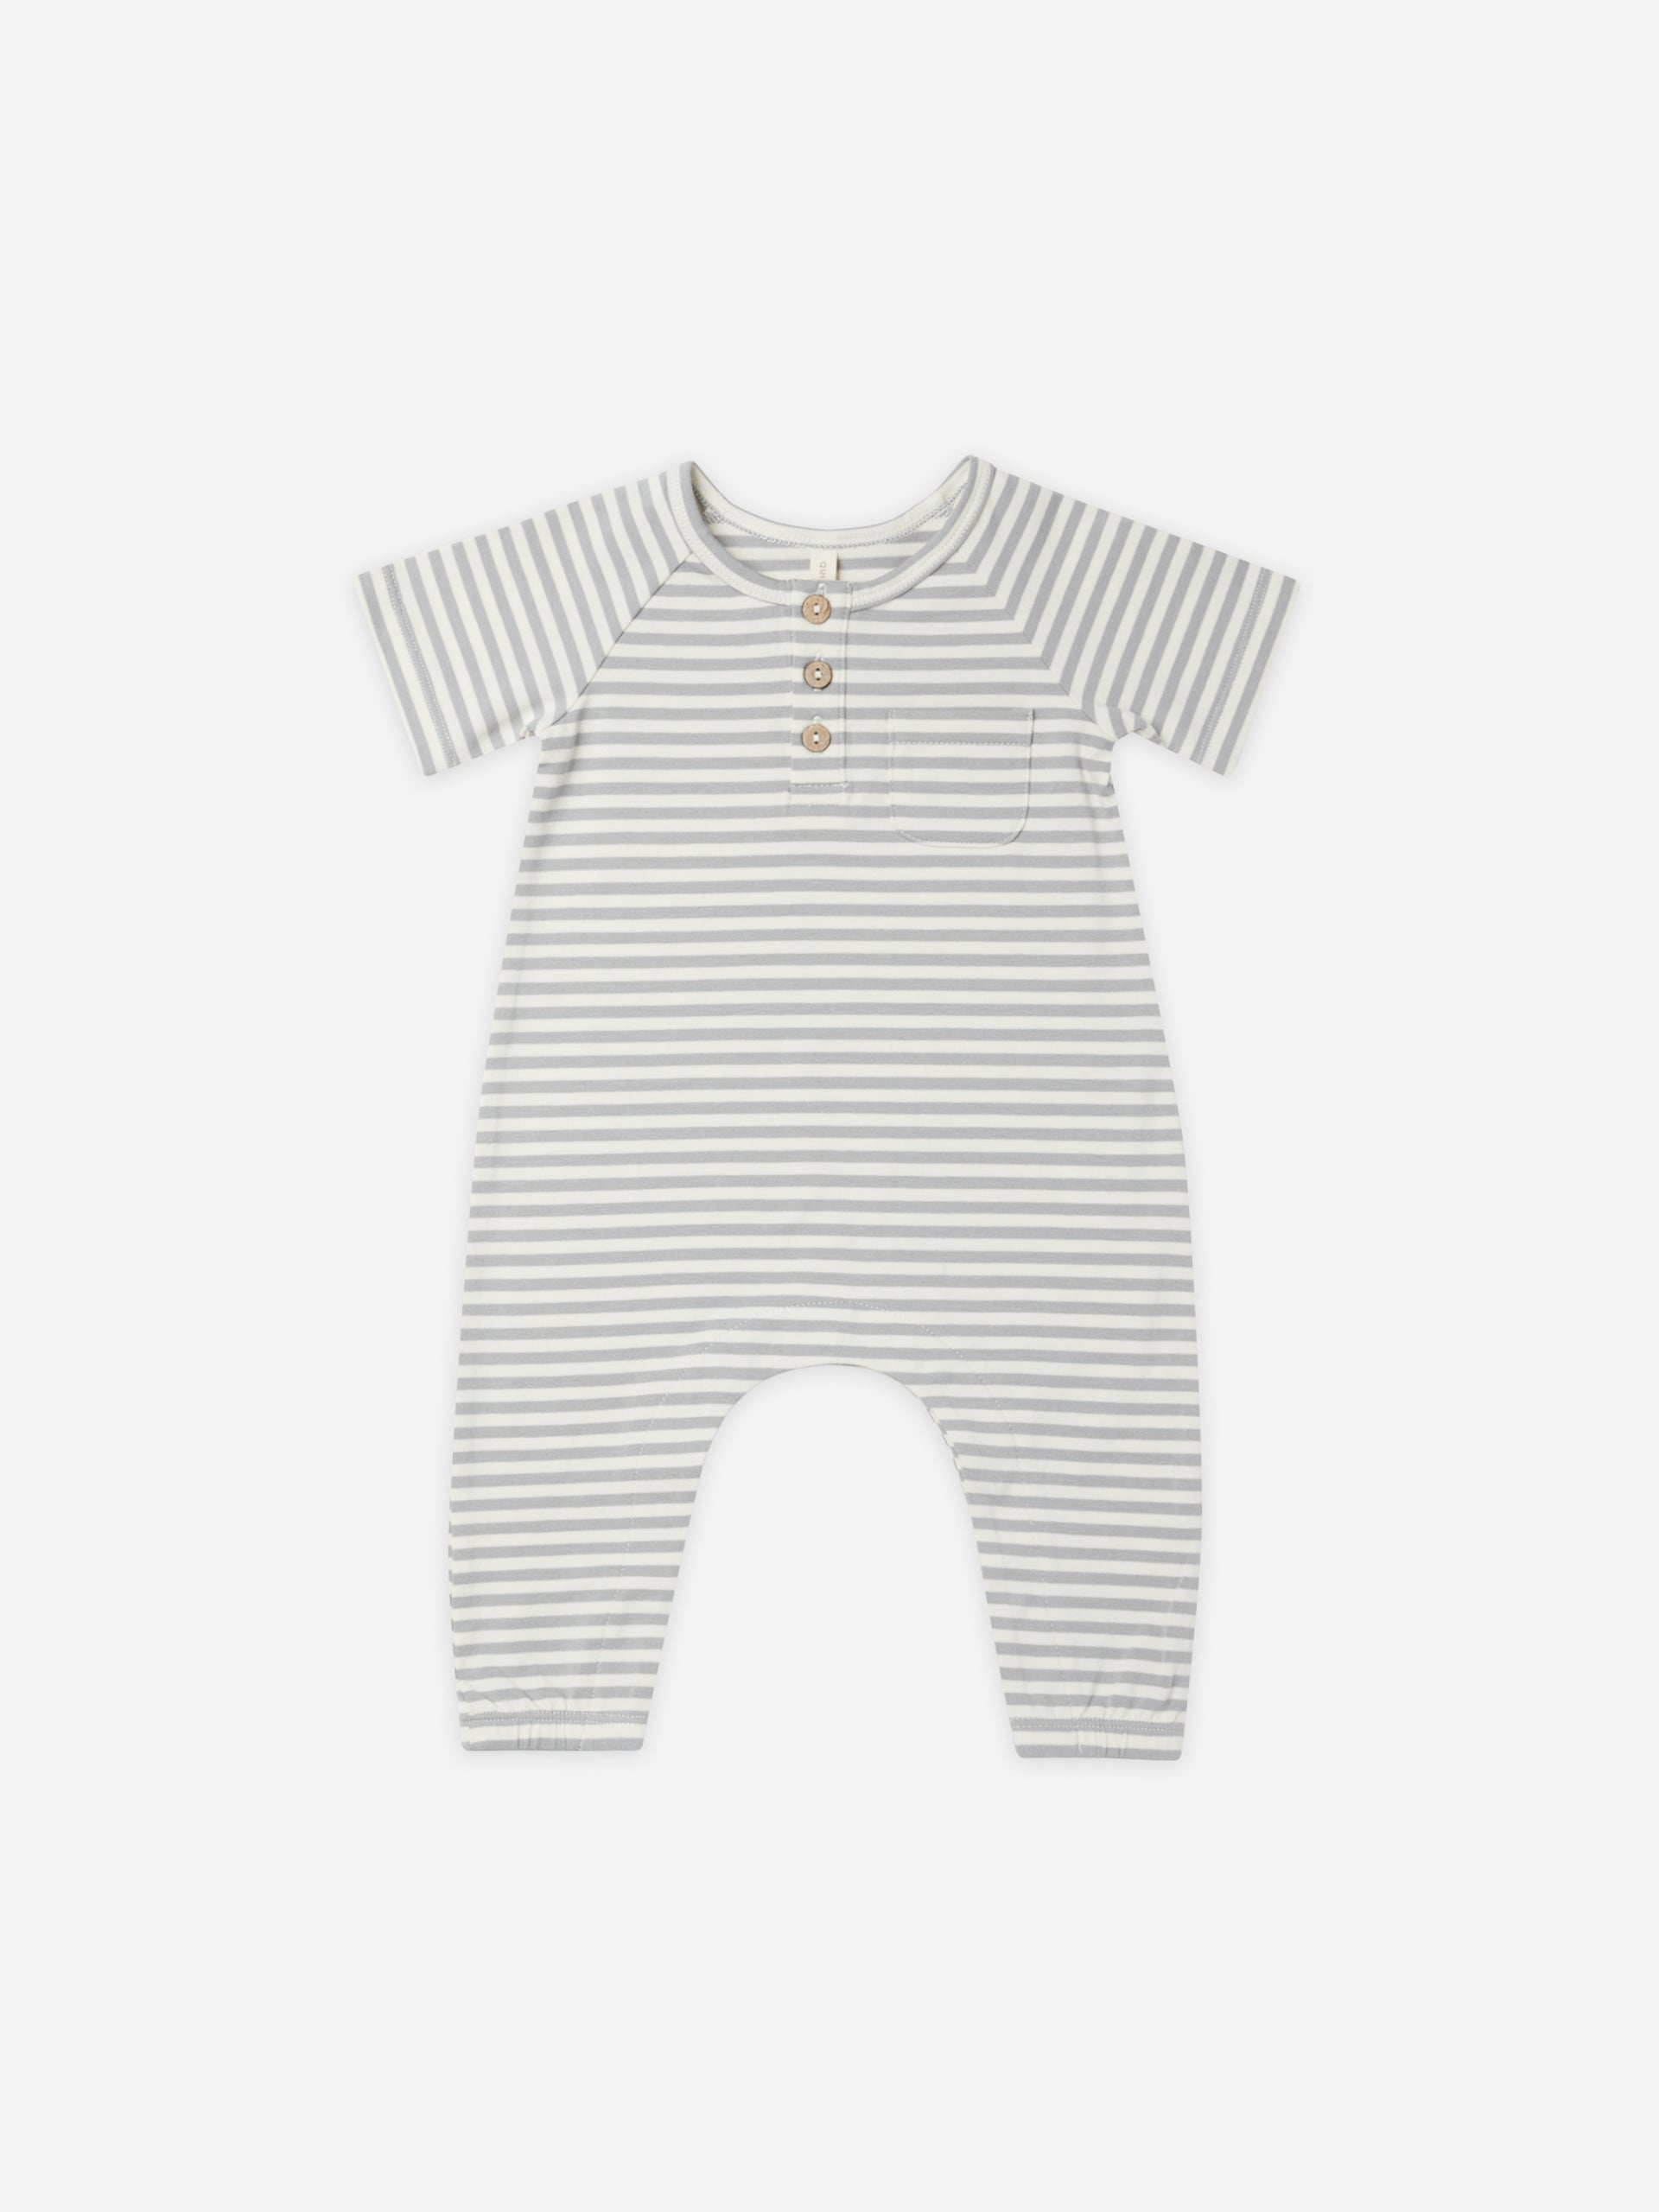 Short Sleeve Jumpsuit || Dusty Blue Stripe - Rylee + Cru | Kids Clothes | Trendy Baby Clothes | Modern Infant Outfits |